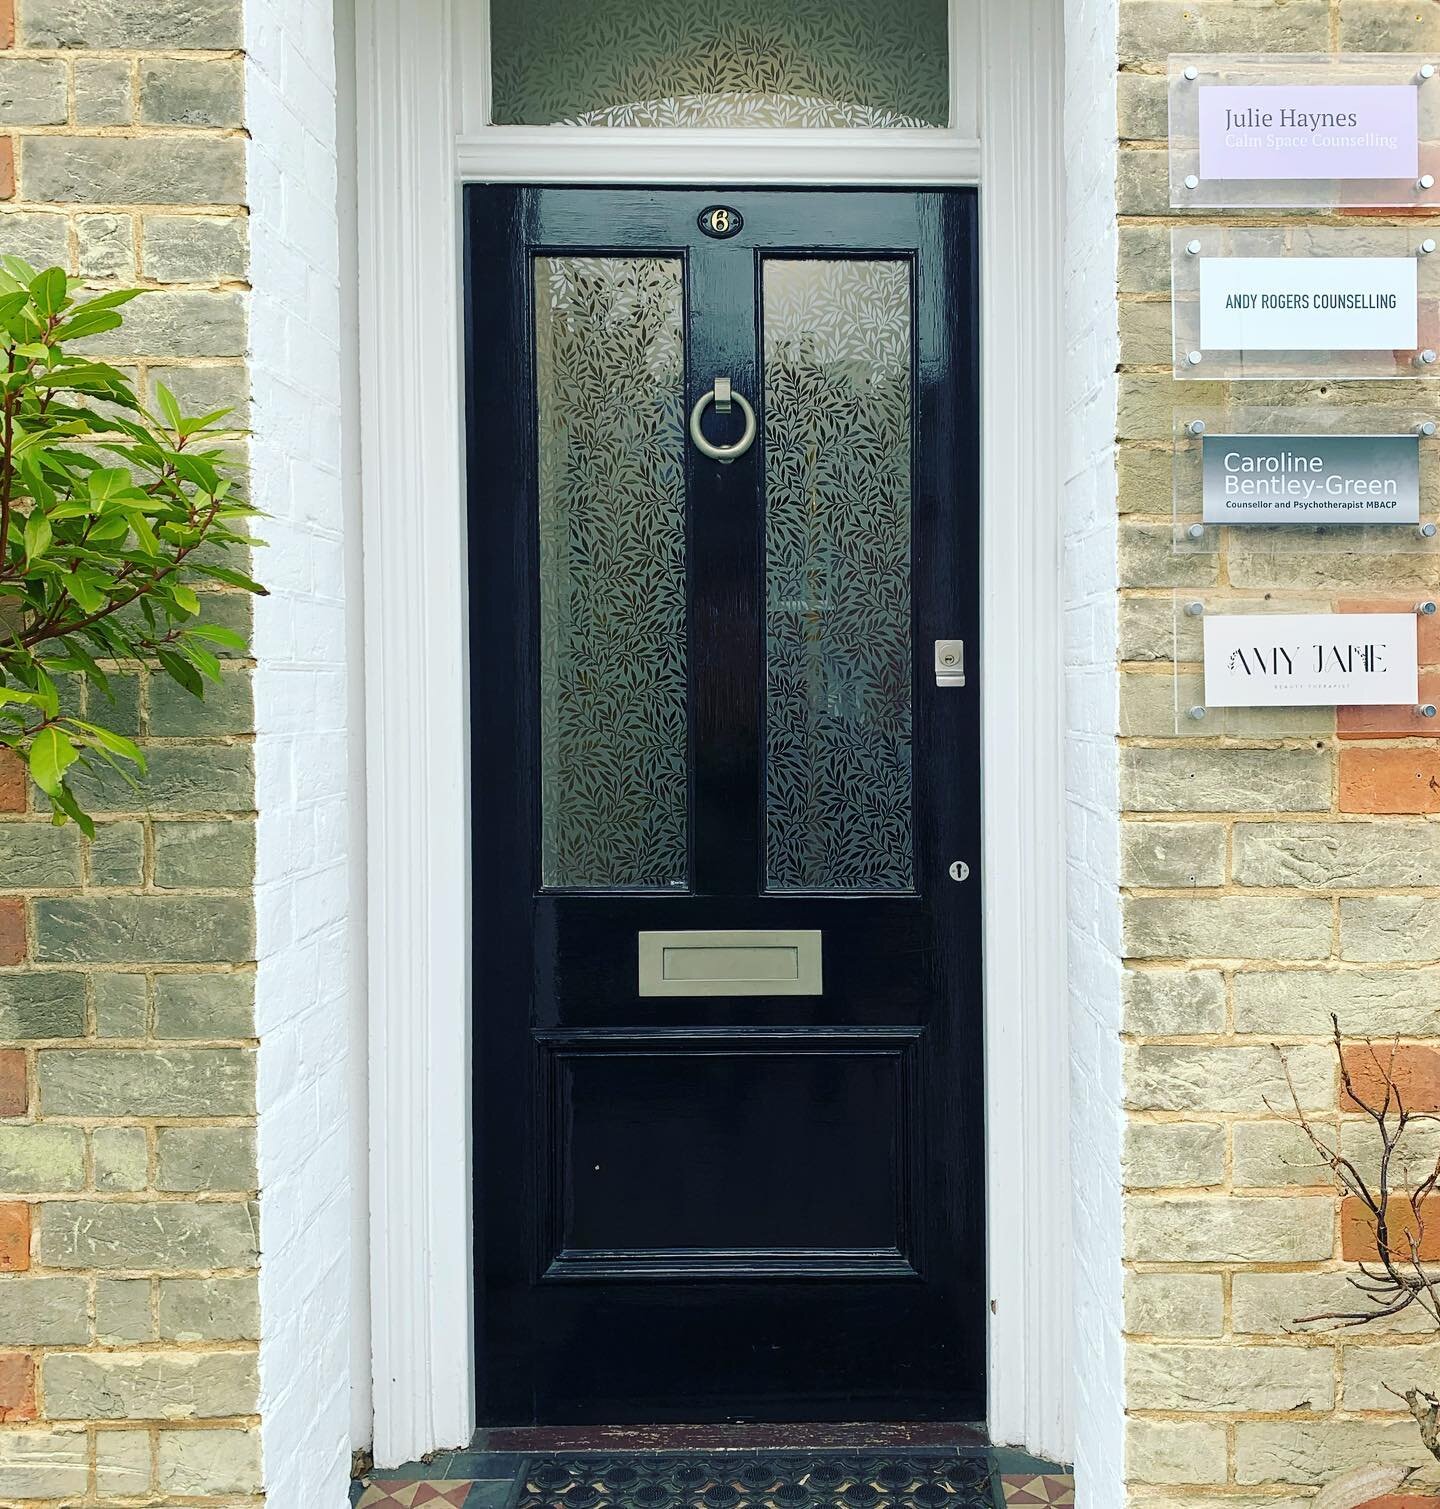 Welcome! This is where my counselling practice is based, in the centre of #Basingstoke. Some other therapists work here too, so it&rsquo;s quiet and discreet. If you&rsquo;d like to enquire about availability or have any questions, please get in touc